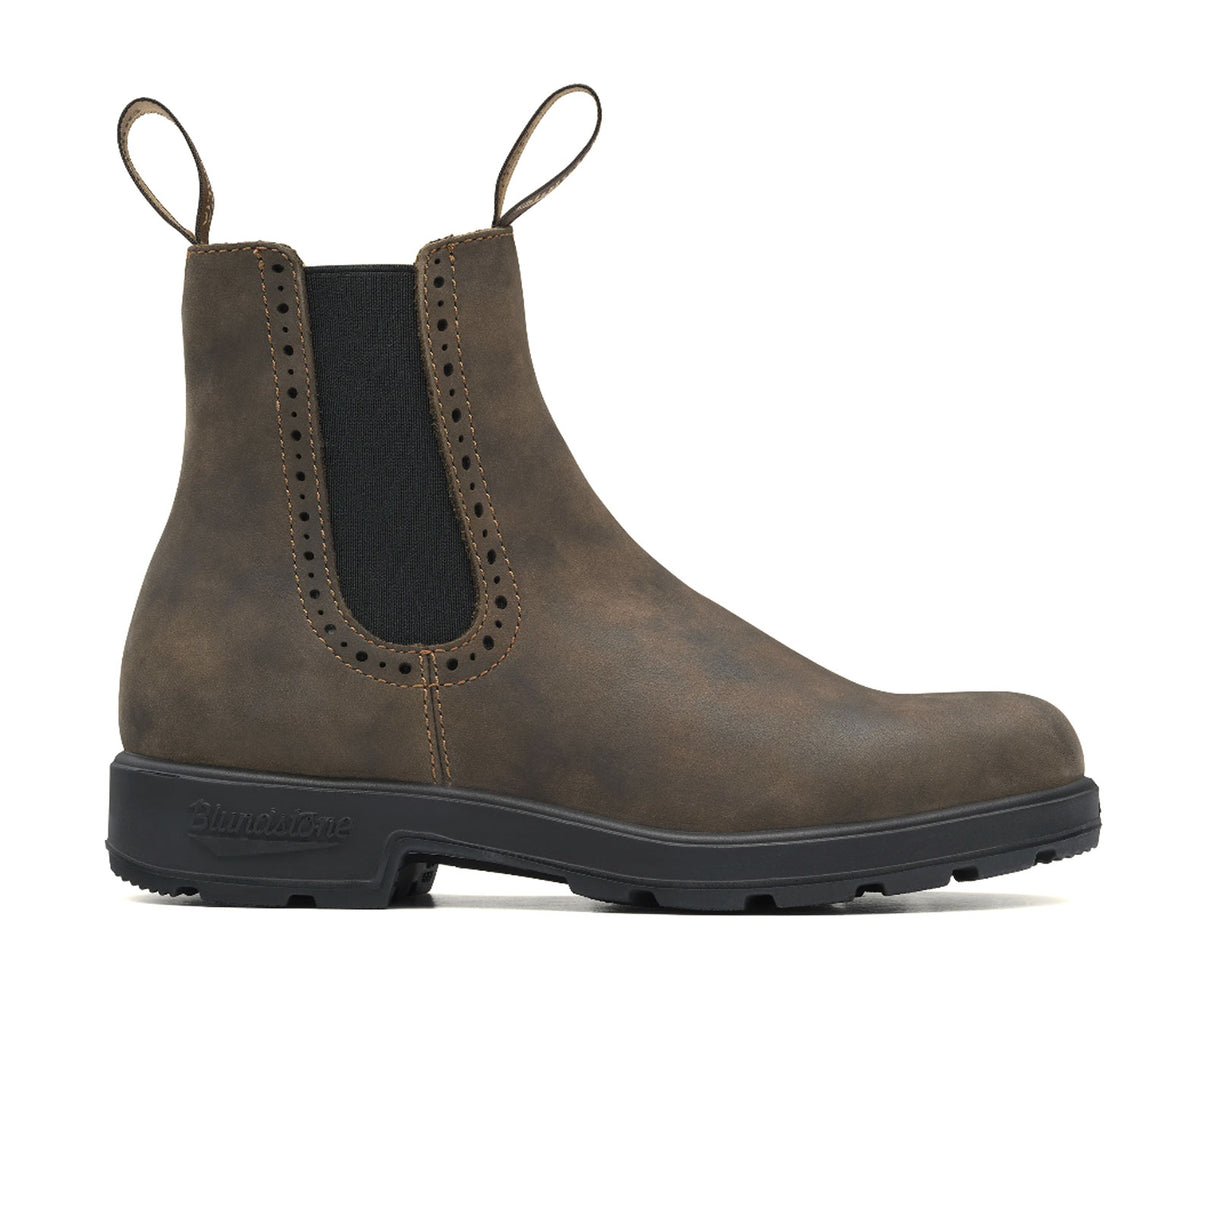 Blundstone 1351 High Top Chelsea Boot (Women) - Rustic Brown Boots - Casual - Mid - The Heel Shoe Fitters